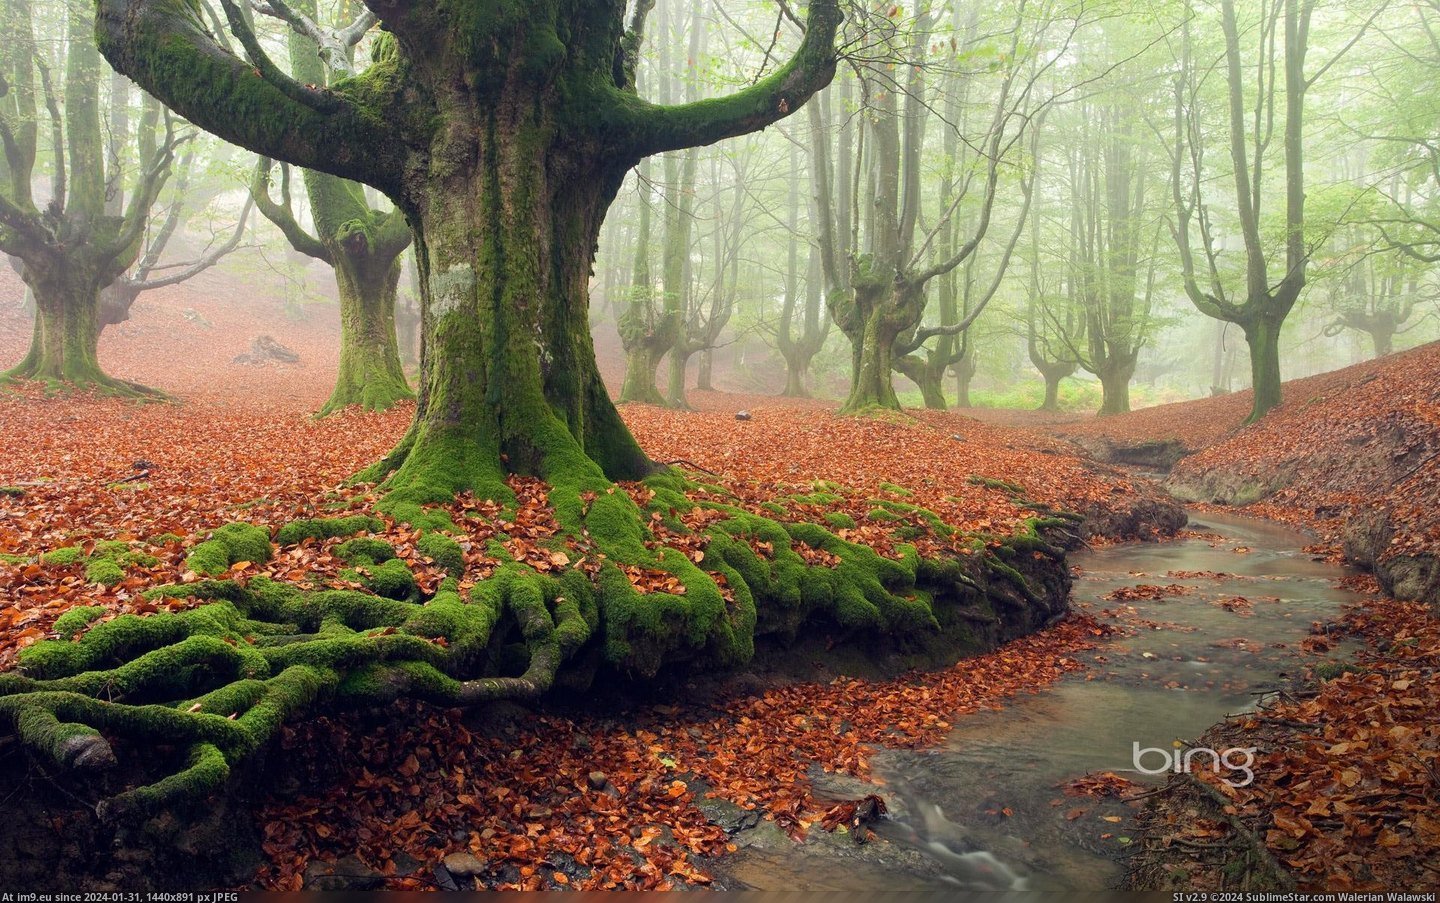 Moss-covered tree roots in Gorbea Natural Park, Basque Country, Spain (in Bing Photos November 2012)